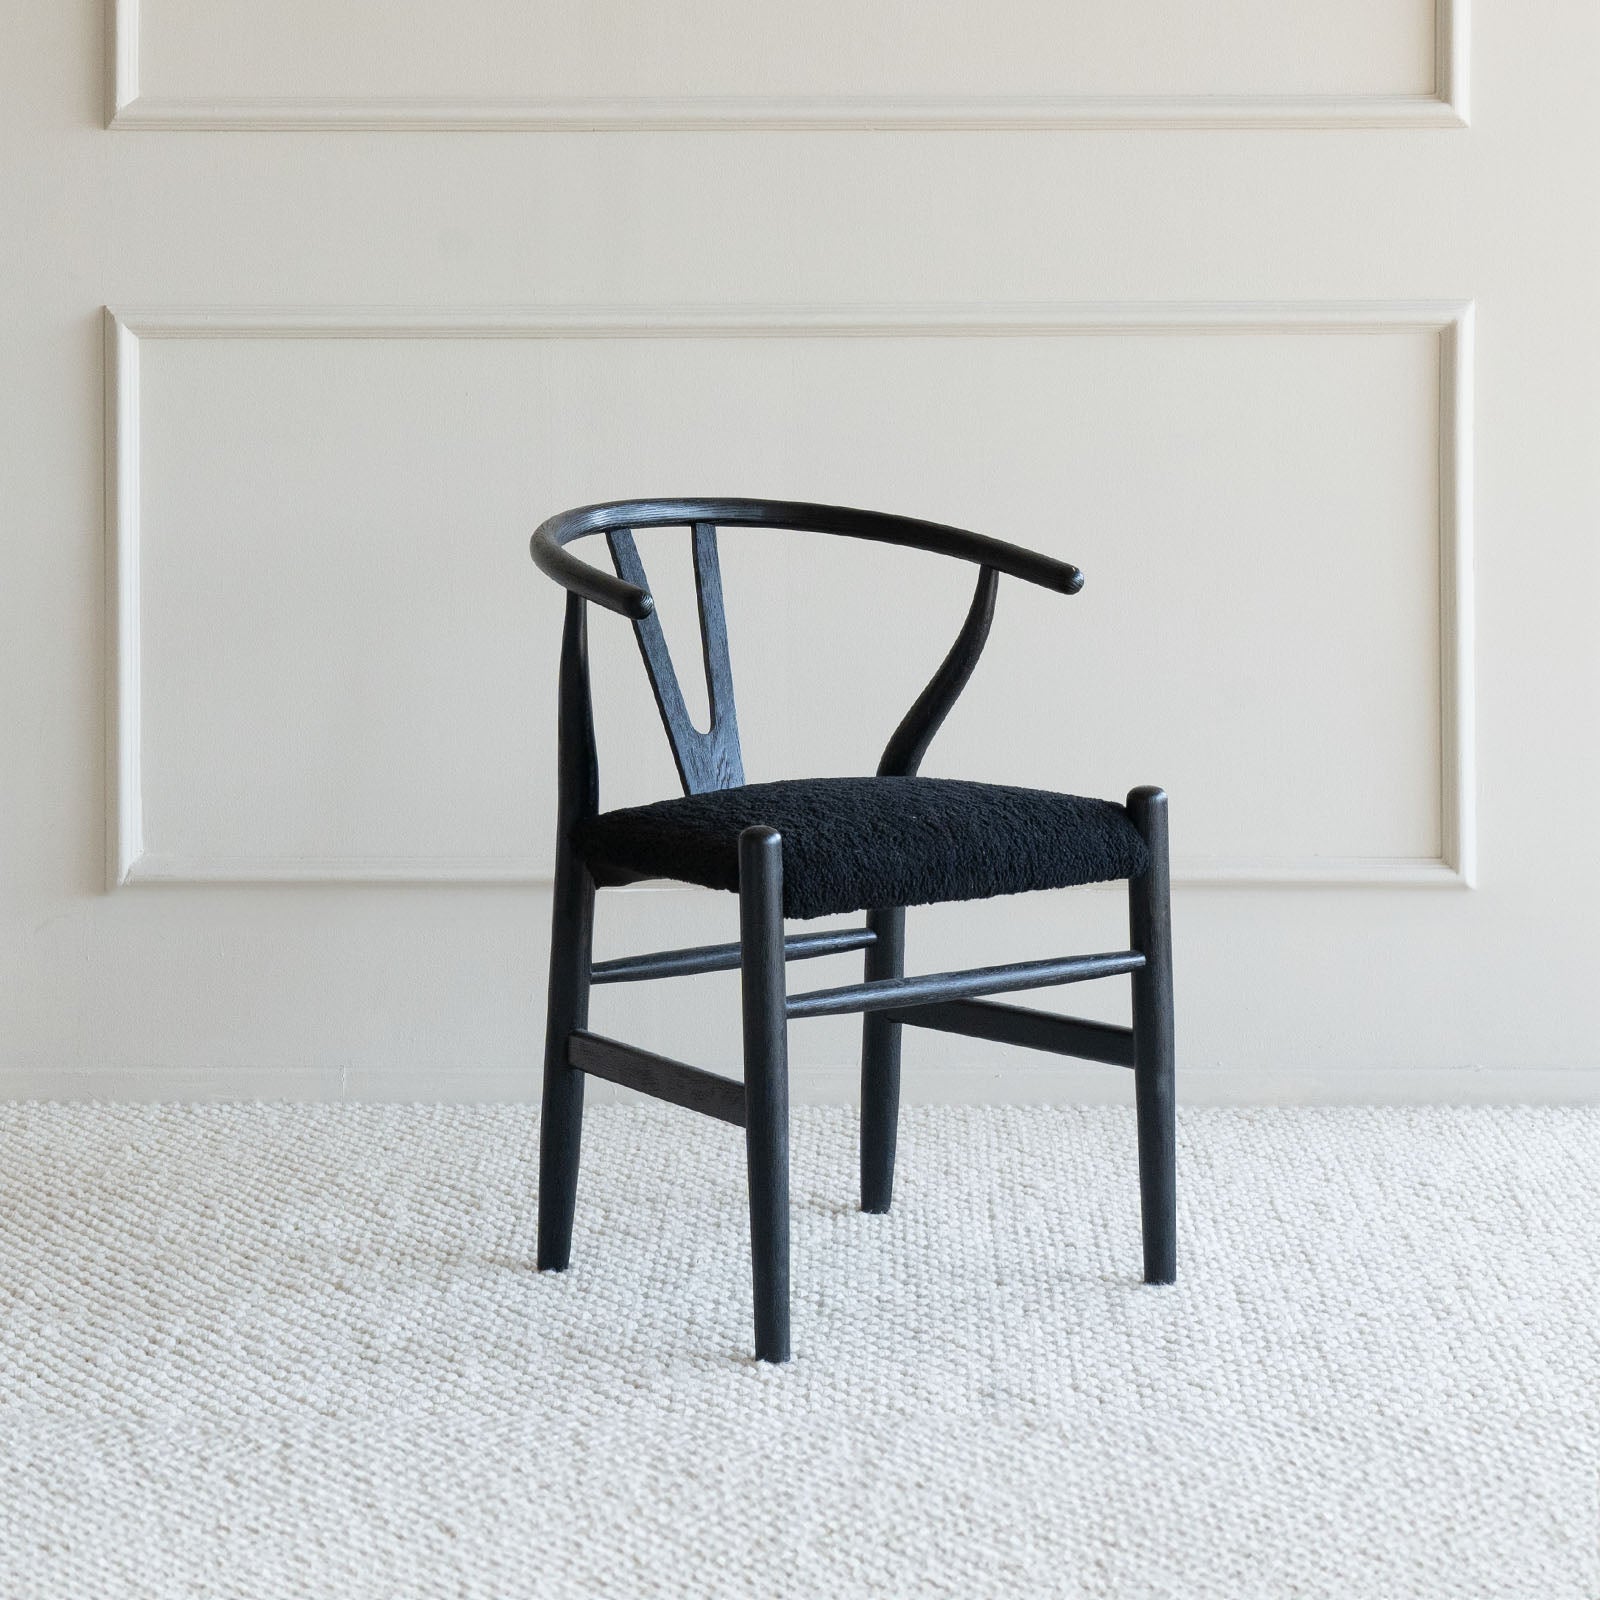 Wishbone Chair(s) - Wood and Steel Furnitures